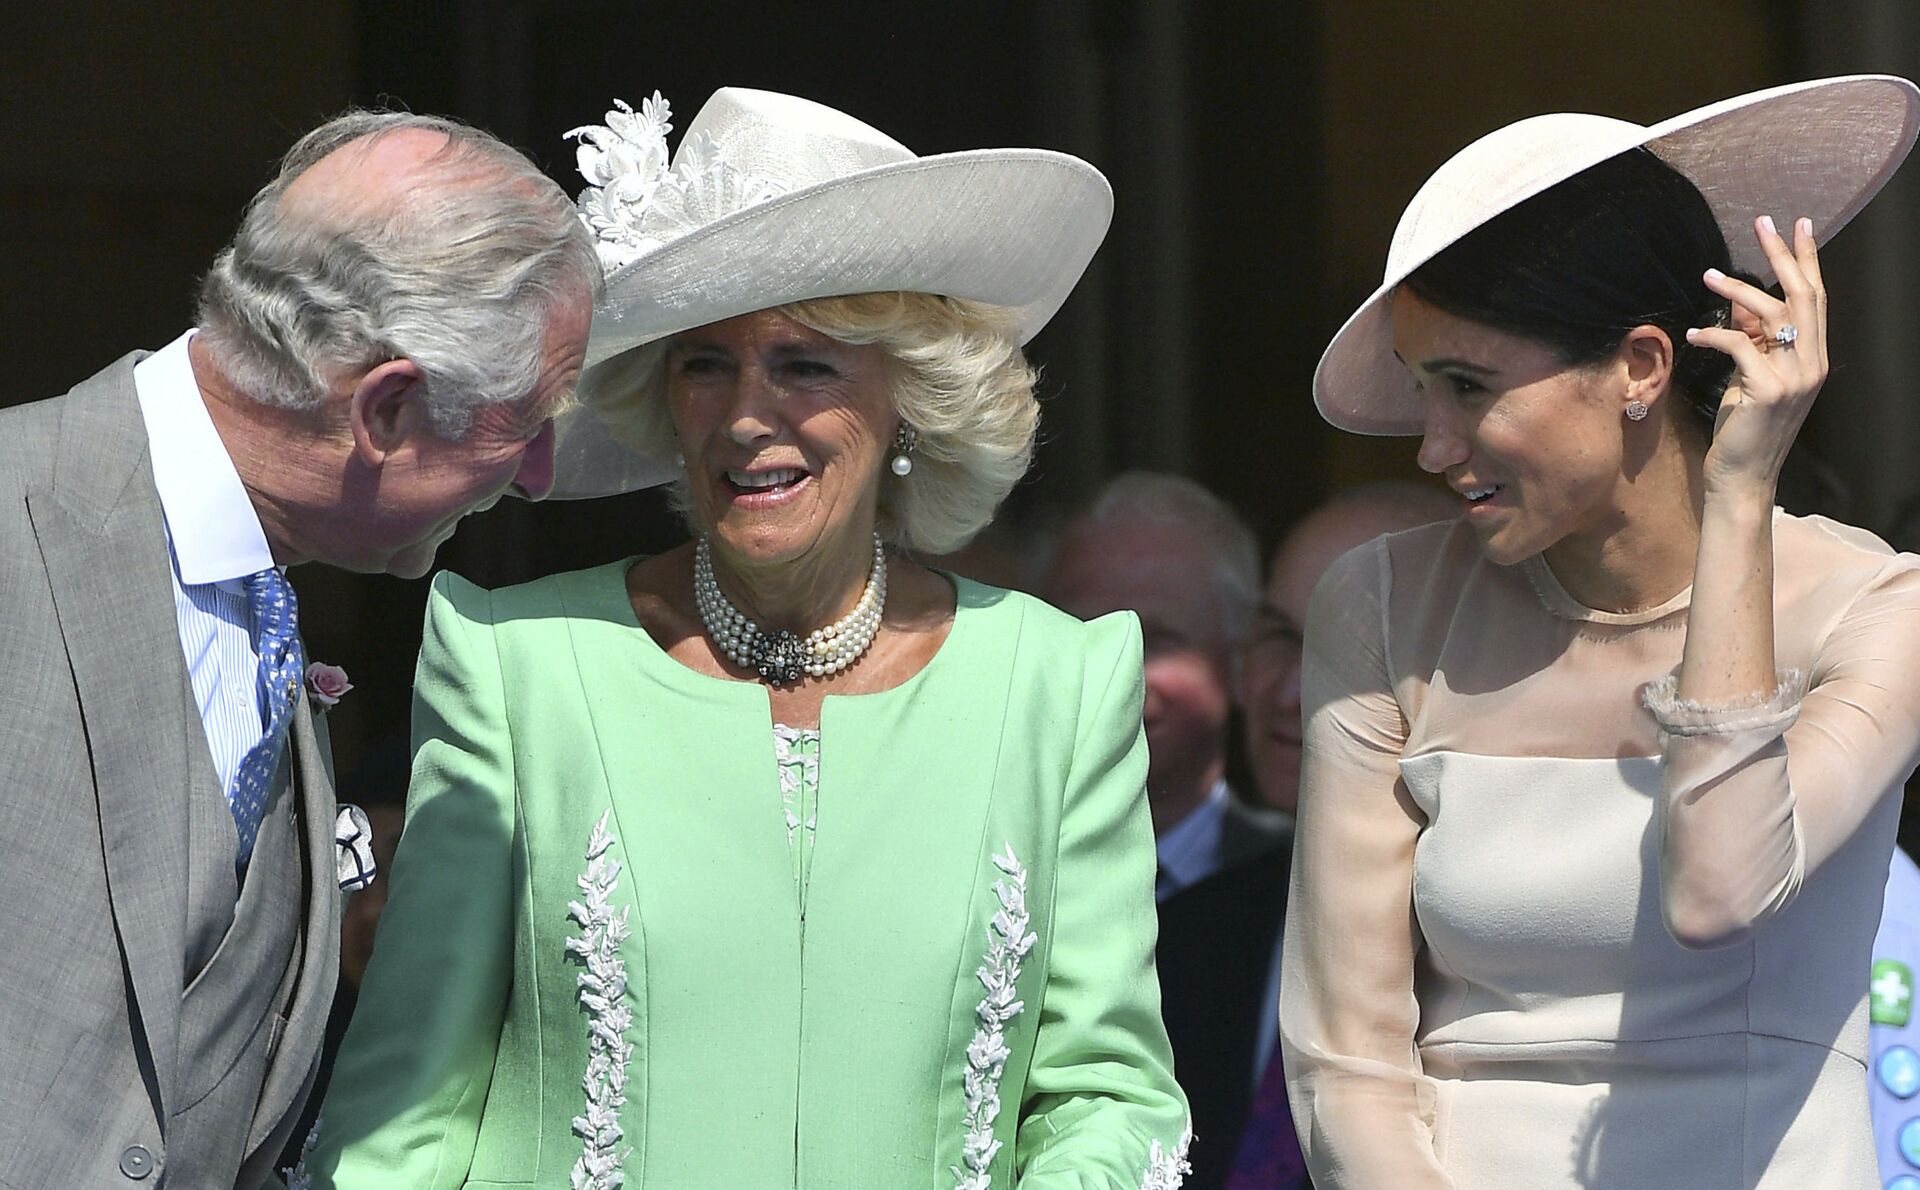 Britian's Prince Charles, left, reacts with Camilla, the Duchess of Cornwall and Meghan, the Duchess of Sussex, during a garden party at Buckingham Palace in London, Tuesday May 22, 2018. - Sputnik International, 1920, 10.04.2022